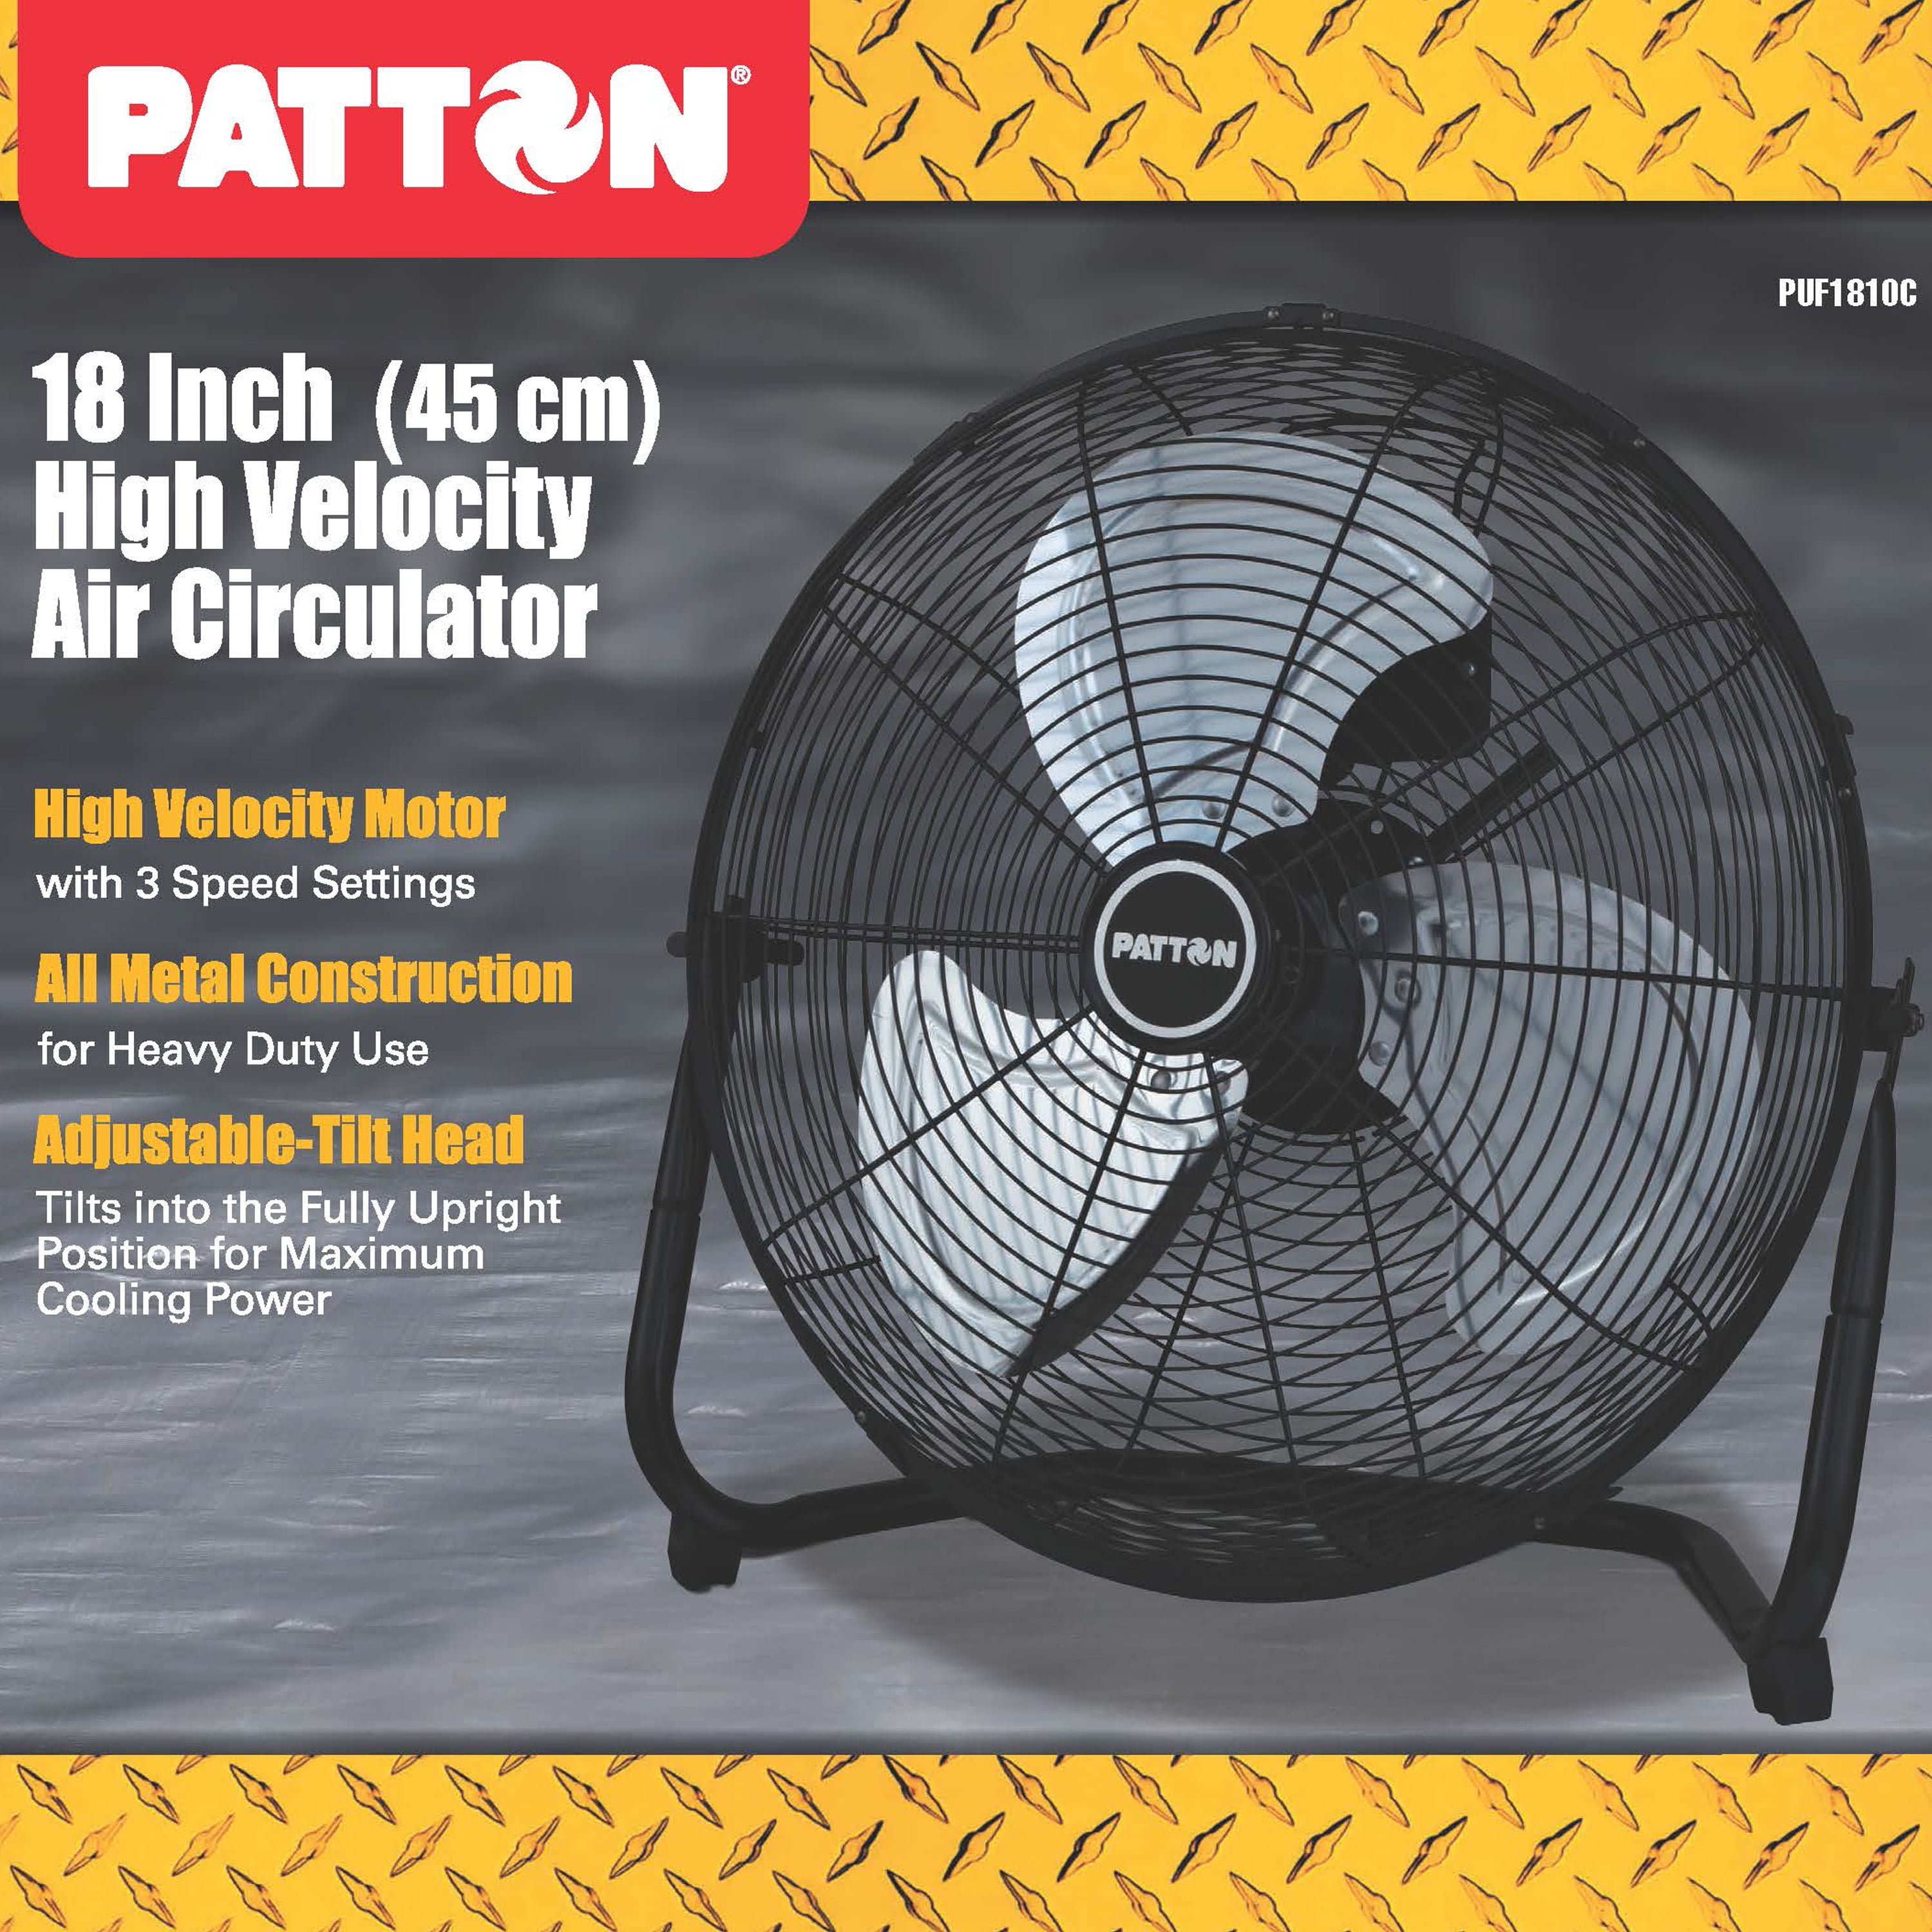 Patton Fans Replacement Parts Best Fan In Thestylishnomadcom